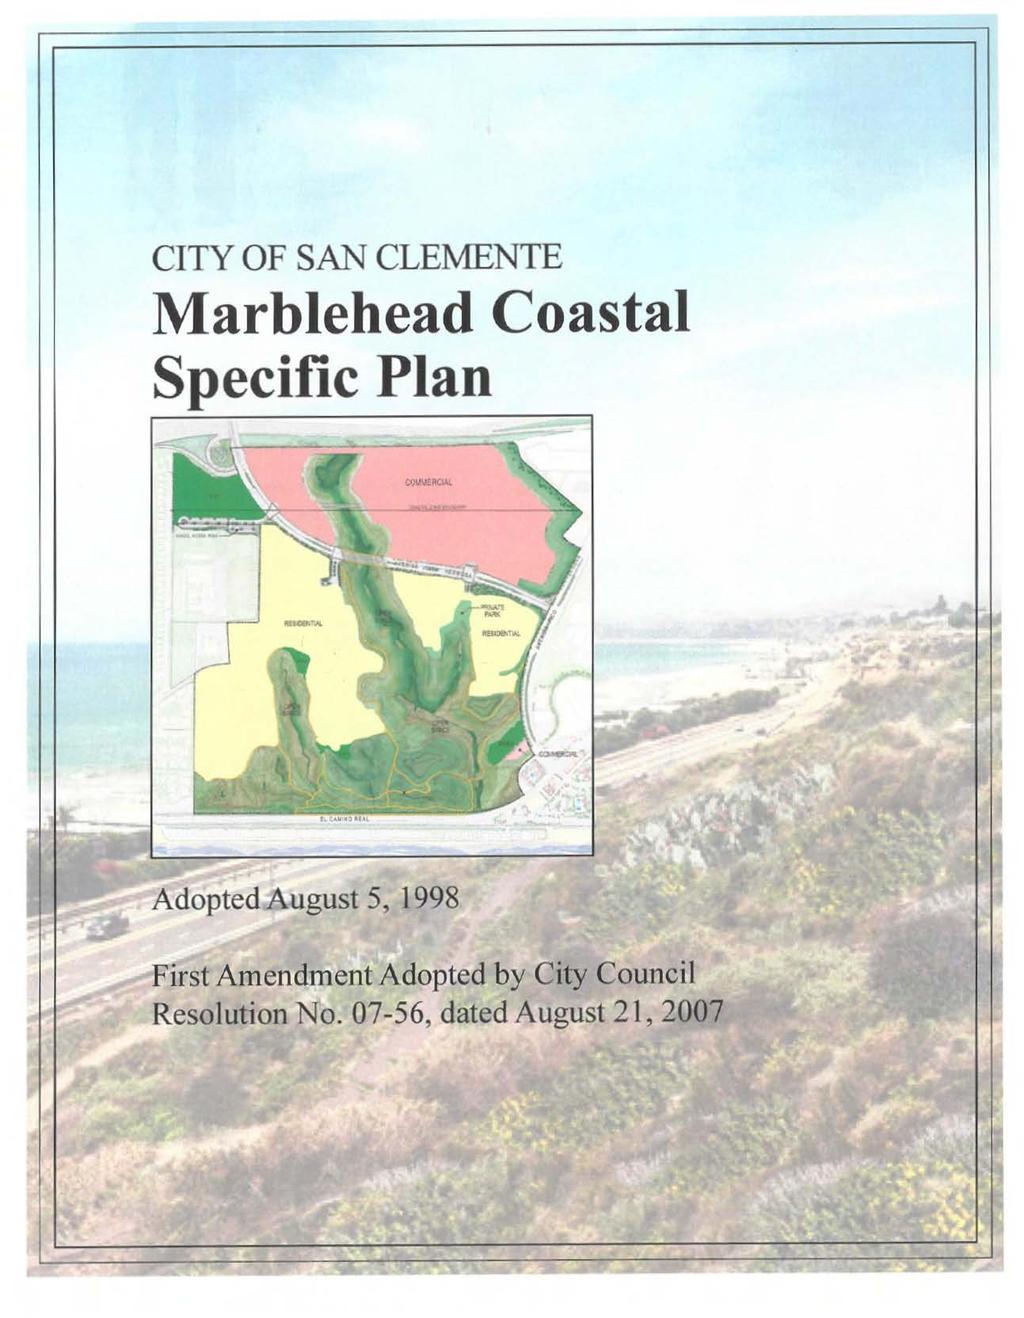 CITY OF SAN CLEMENTE Marblehead Coastal Specific Plan I ".